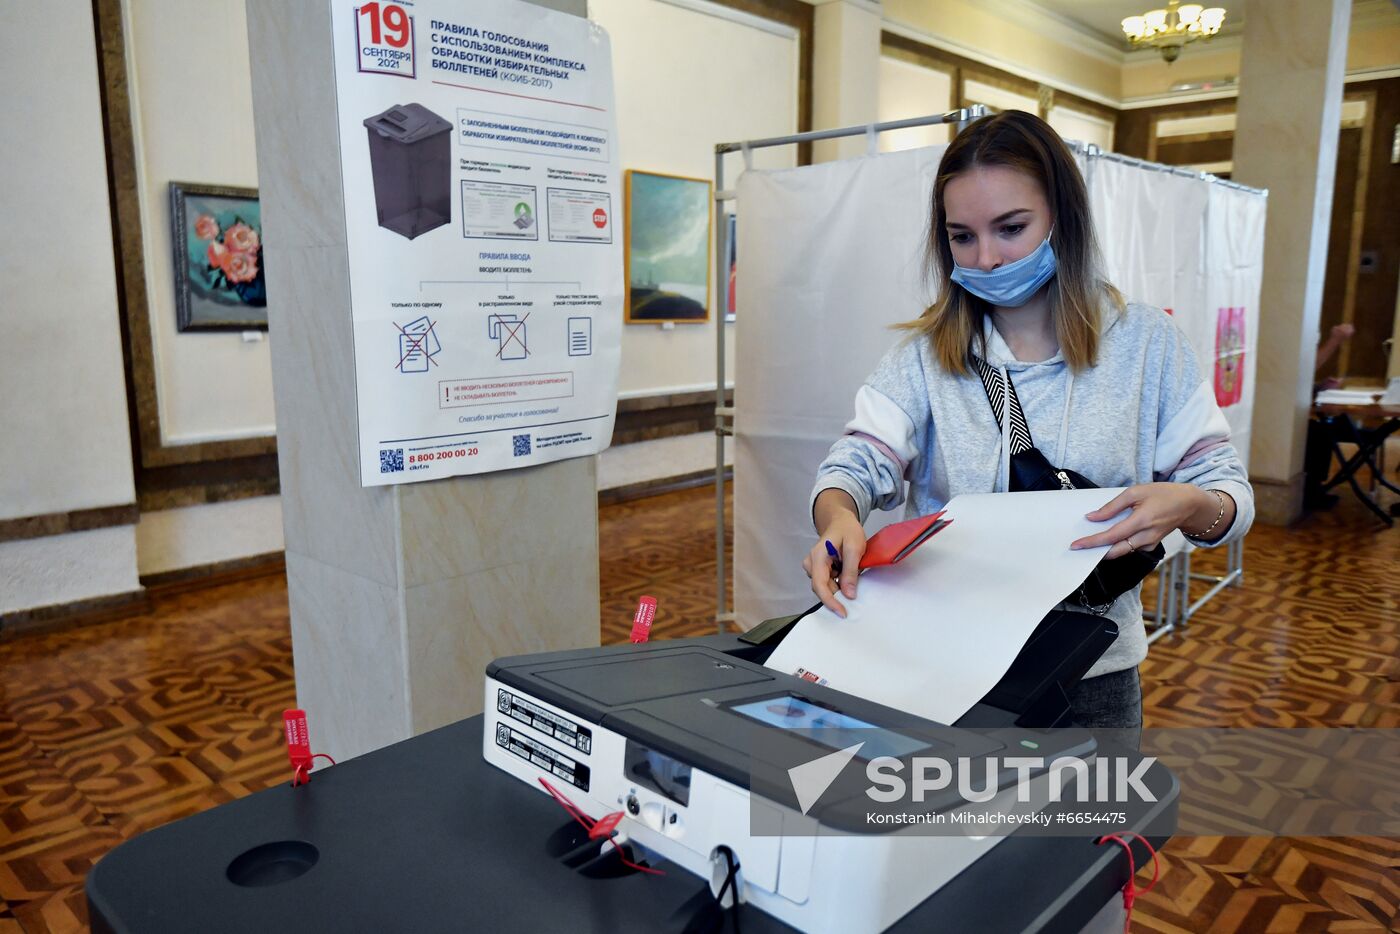 Russia Parliamentary Elections